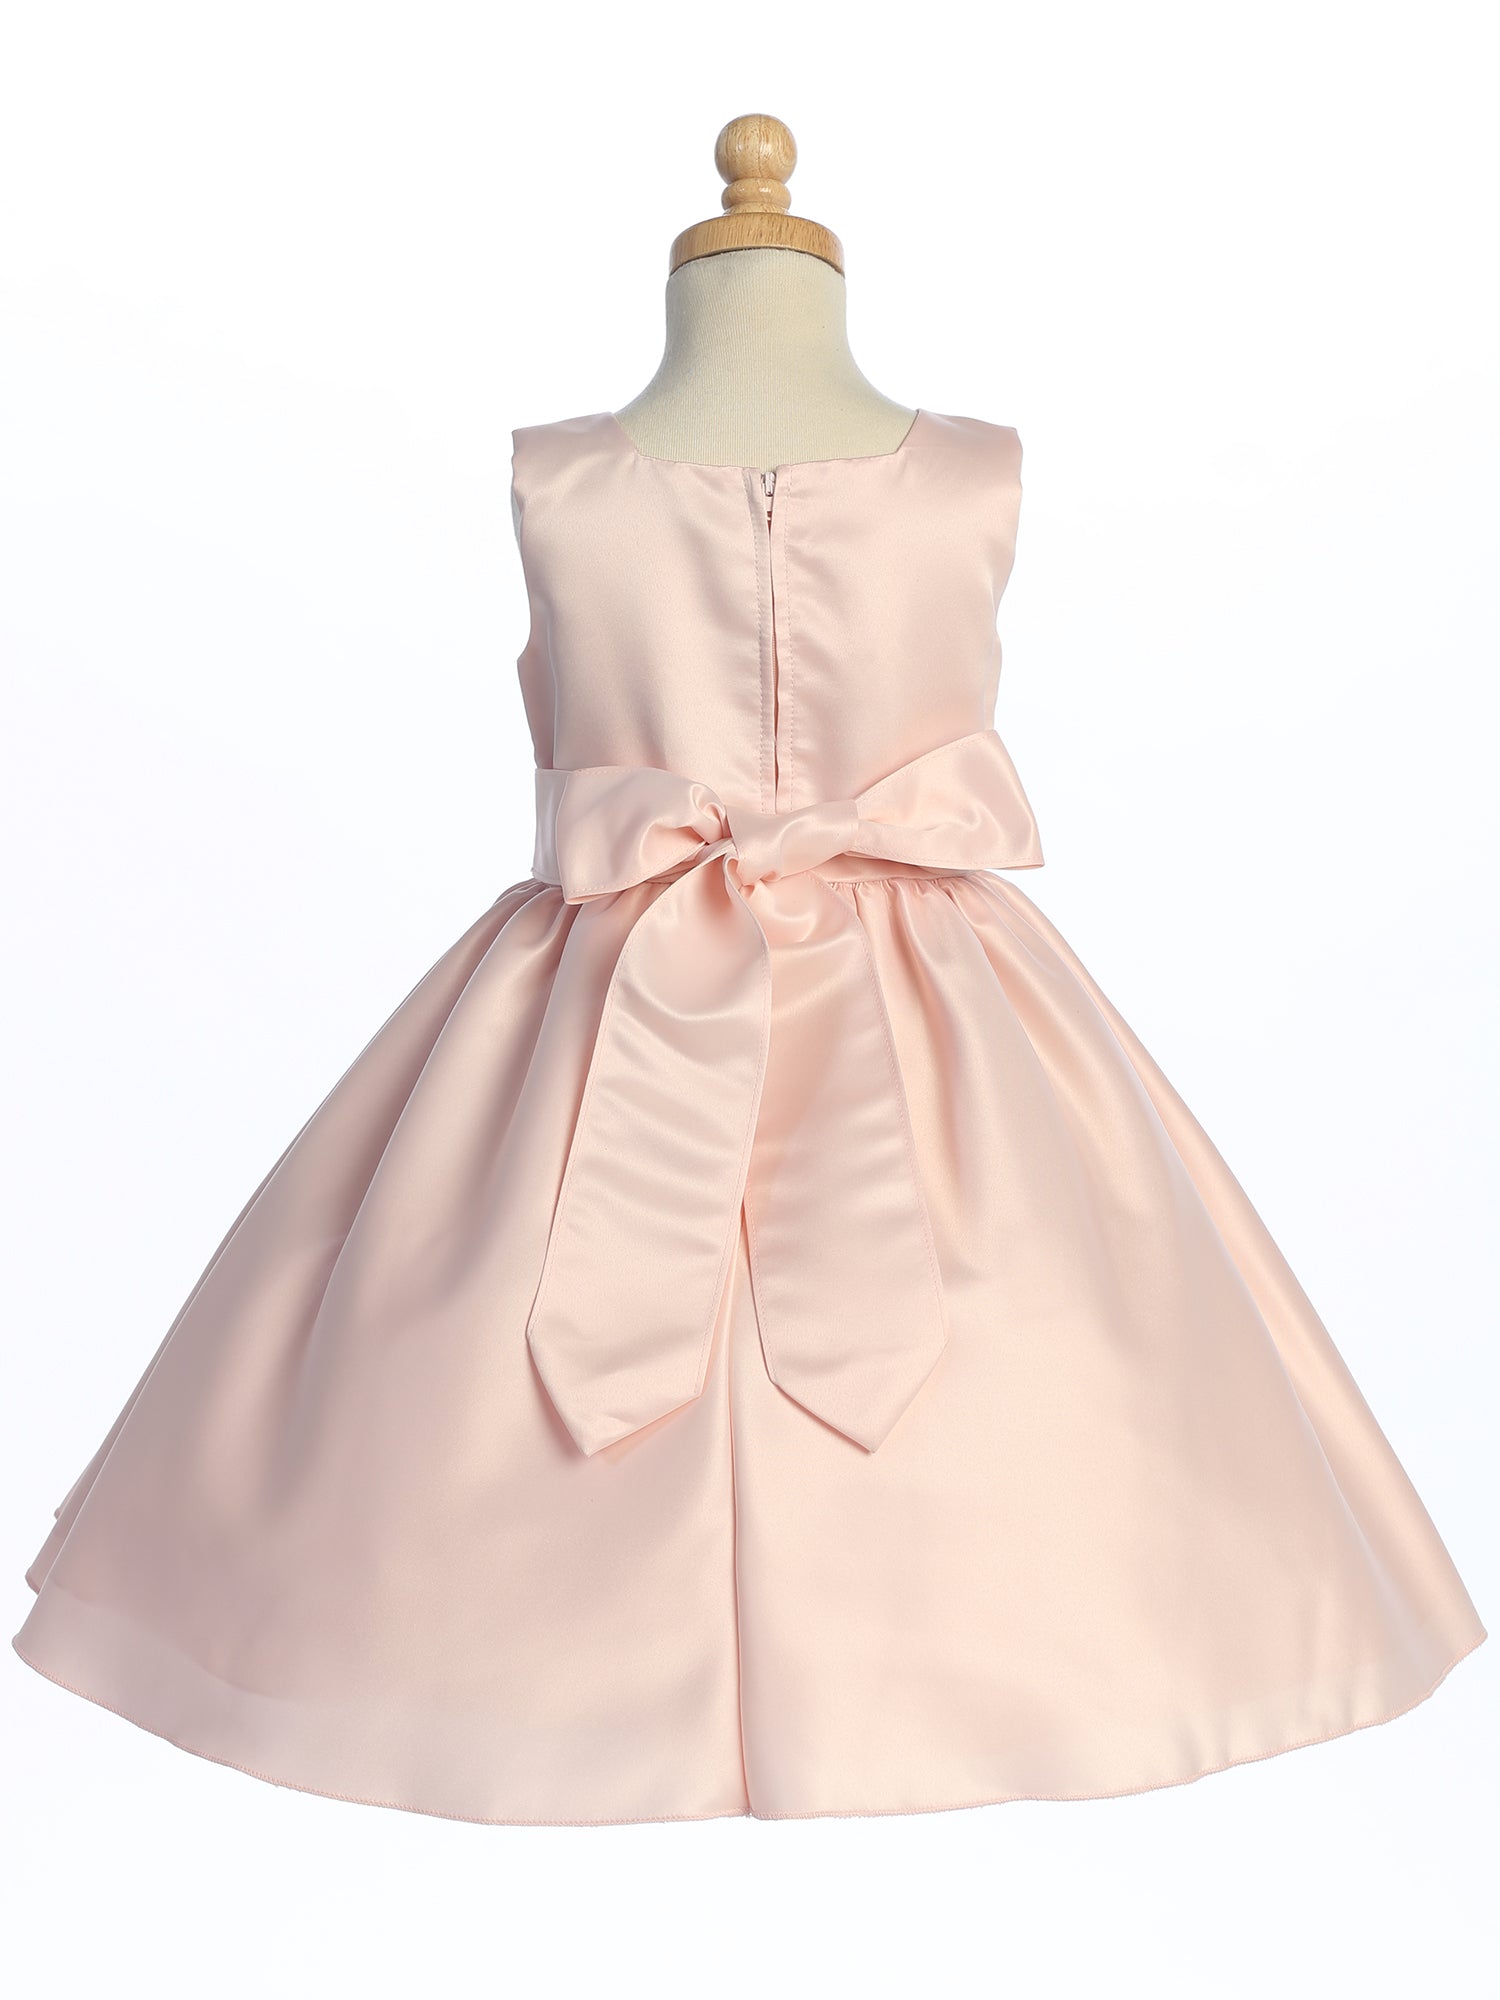 A satin dress from the U.S.A. adorning a flower girl, pure elegance embodied.